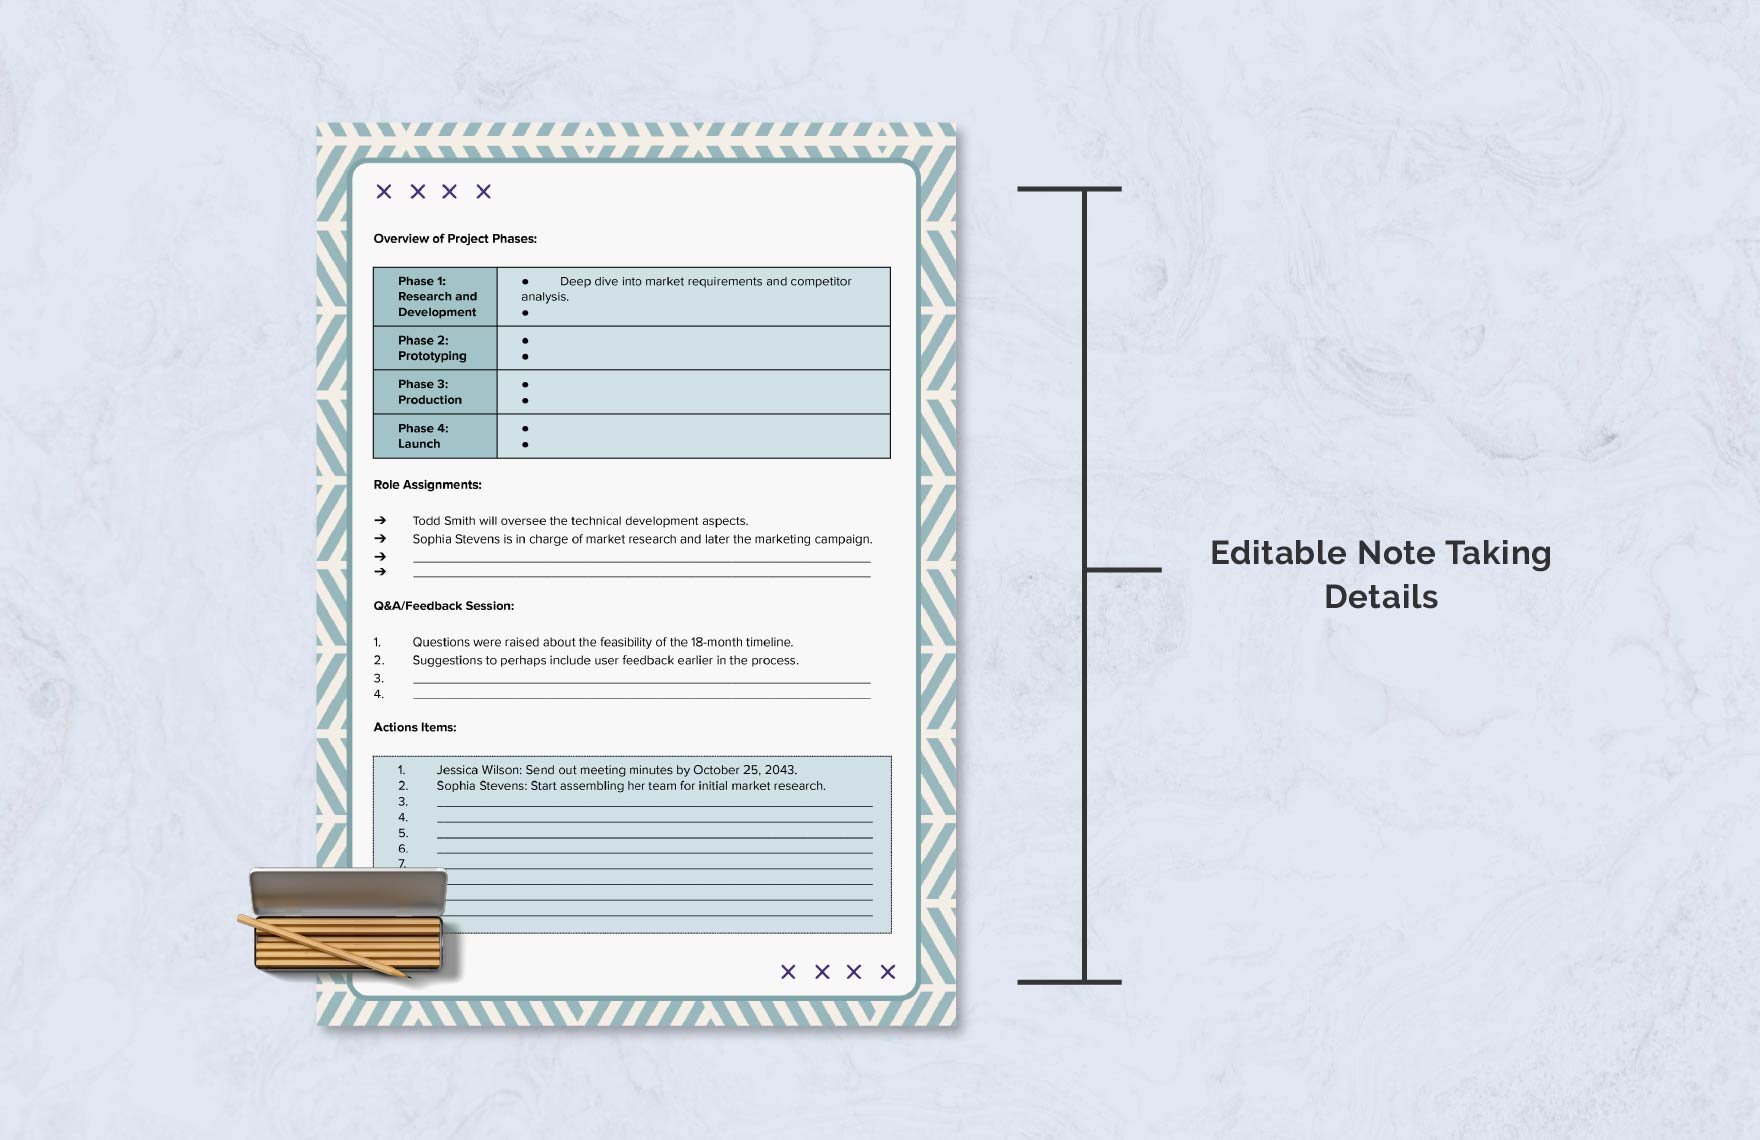 Generic Note Taking Template